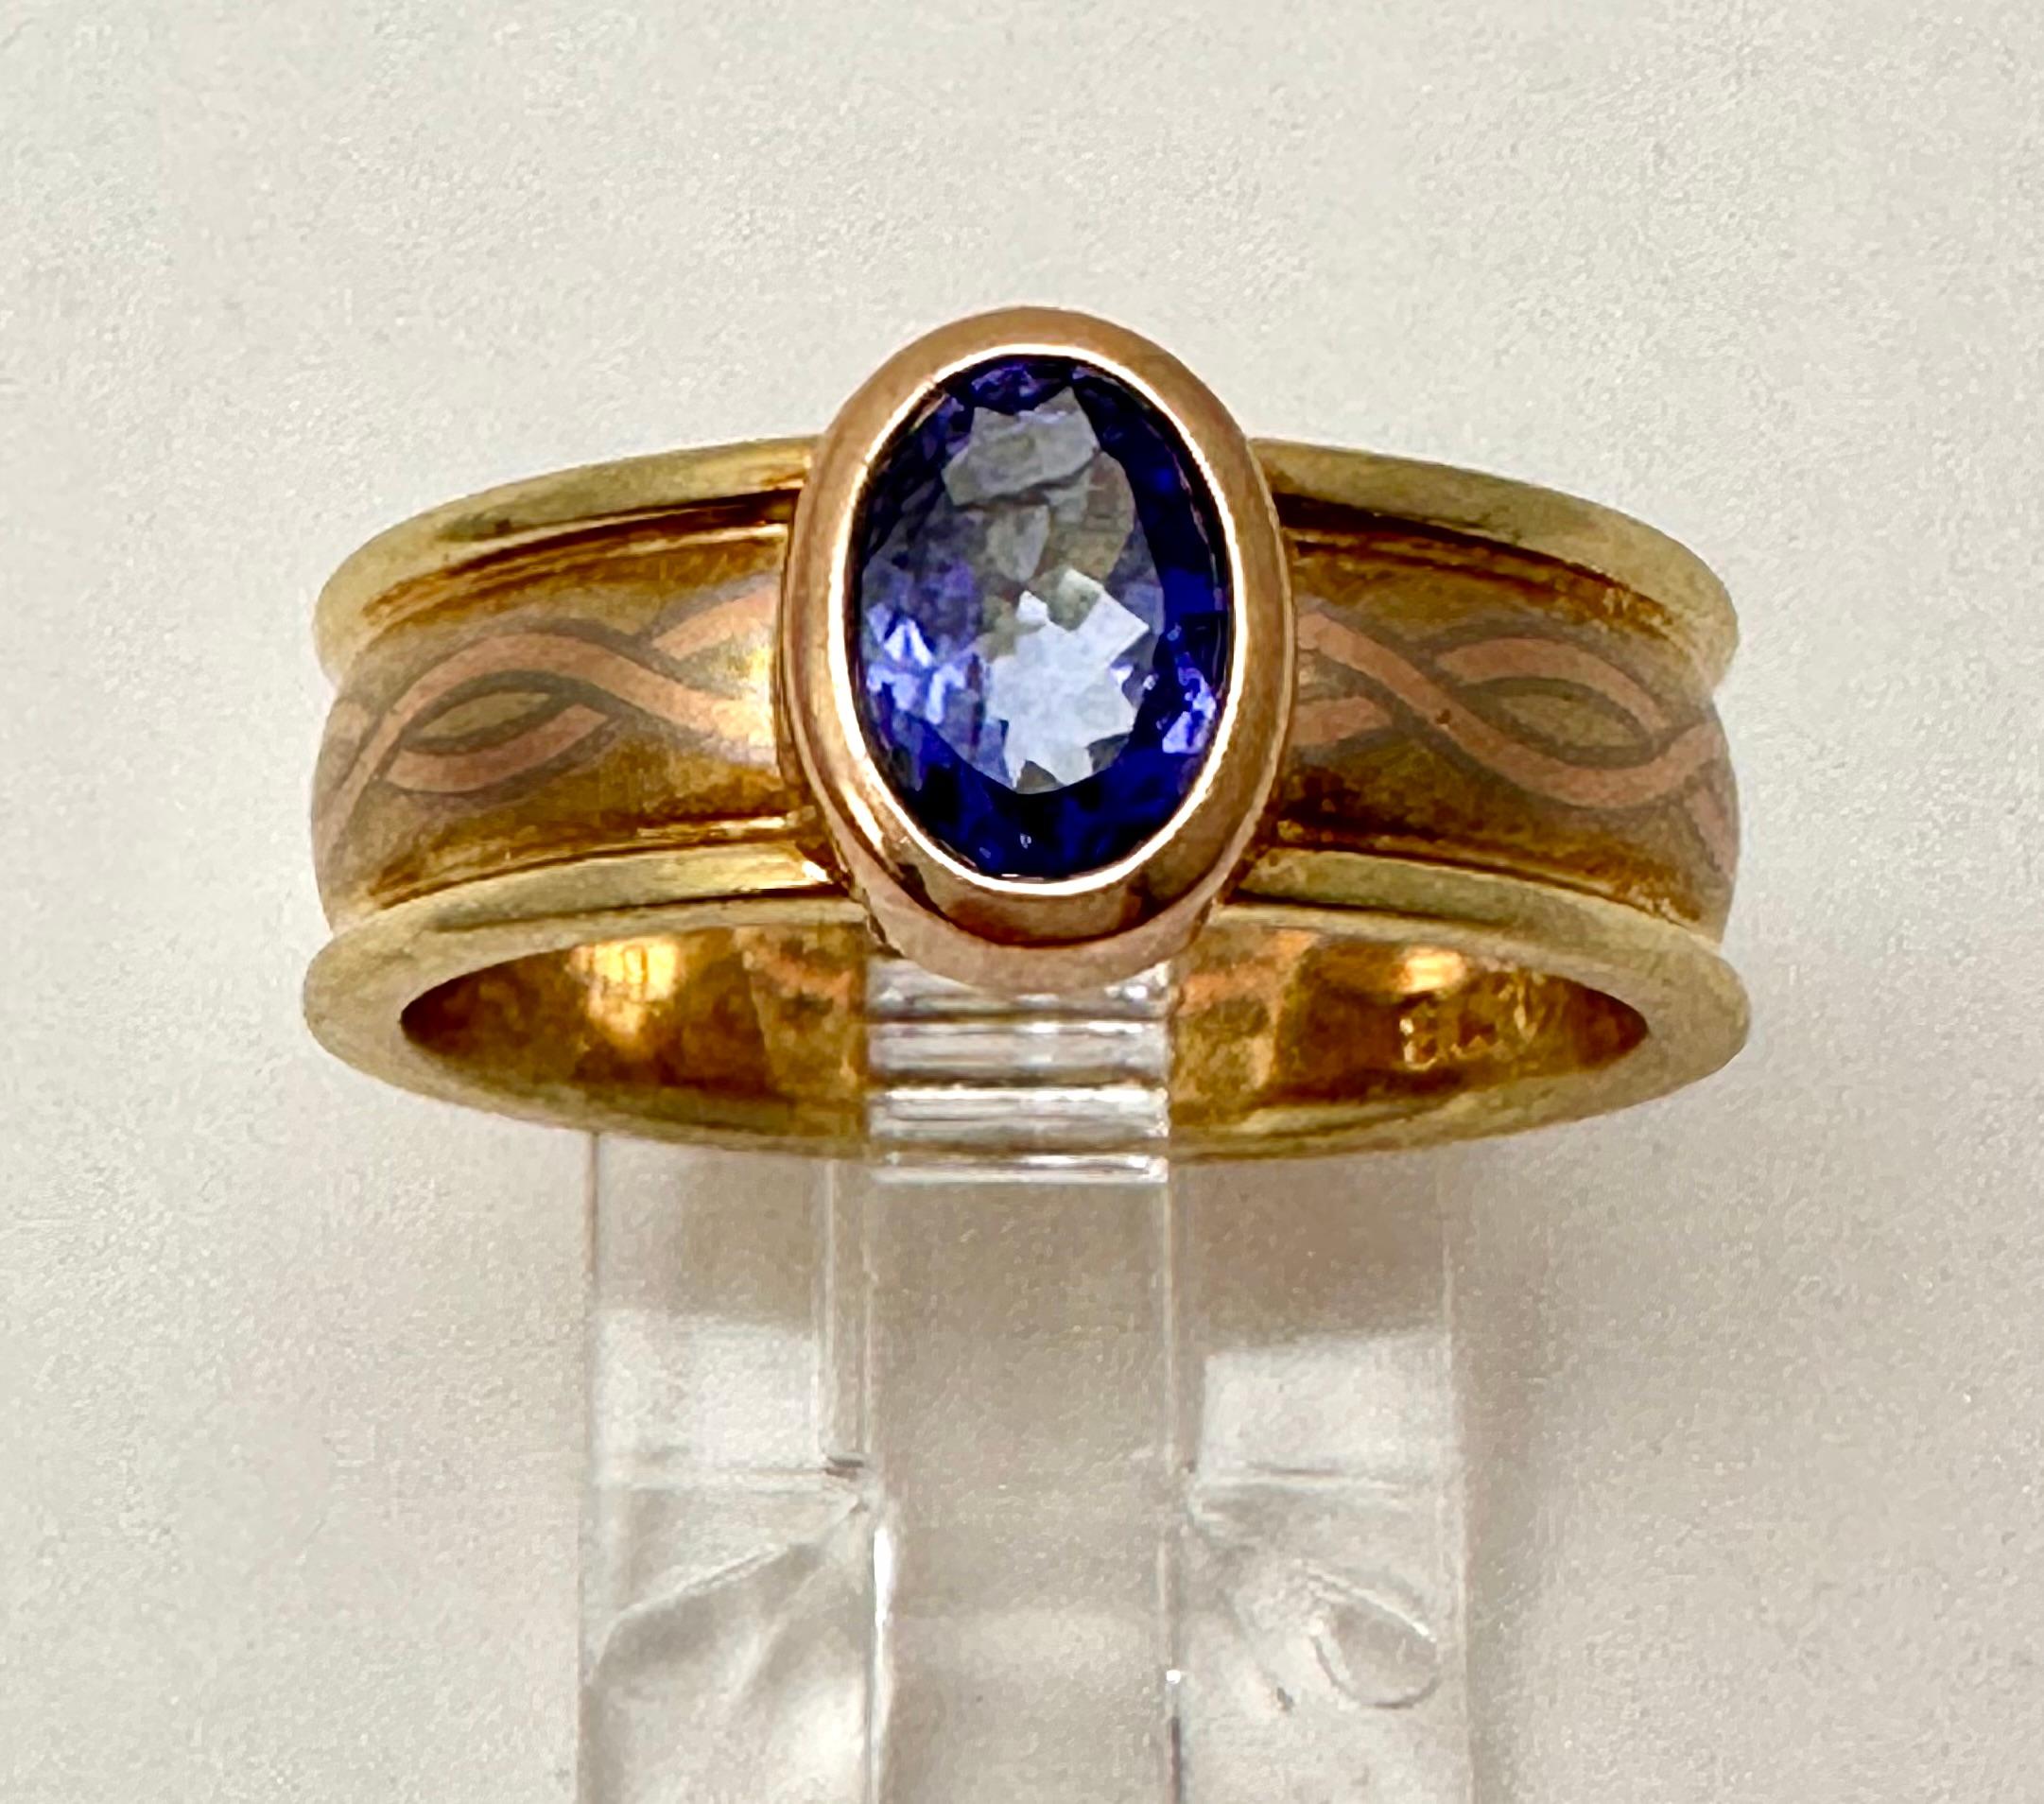 14k Yellow Gold approx. 4.5mm x 6.5 Oval Cut Tanzanite Ring Size 7
stone weight .78ct

Tanzanite 

Tanzanite changes colors when it is viewed from different directions. This shifting of colors has been said to facilitate raising consciousness. It